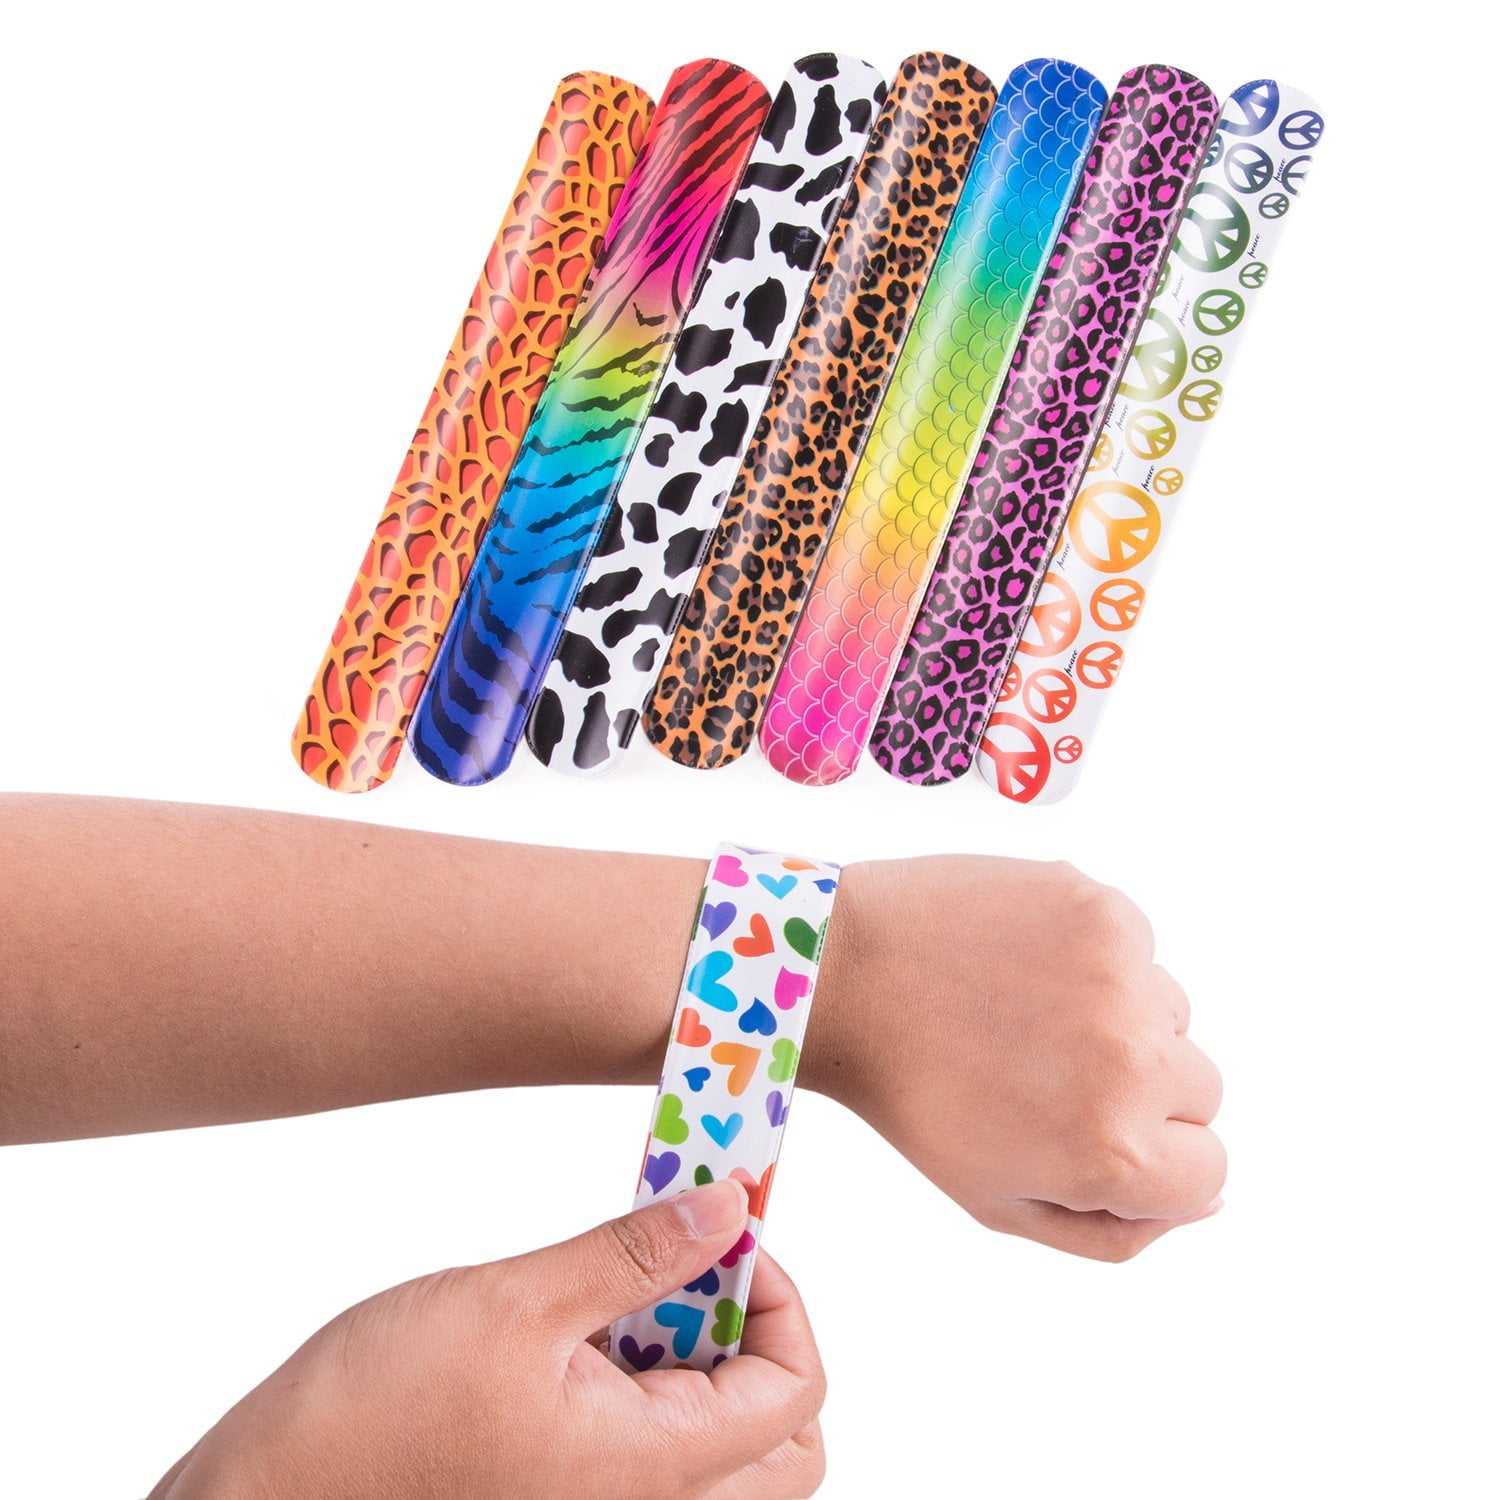 Buy Bracelets Party,52 Pack Slap Bracelets (20 Design), Slap Bands with  Friendship, Peace, Hearts, Animal Prints Toys Valentine's Day Party Favors  Birthday School Classroom Prize Exchanging Gifts Online at Lowest Price Ever